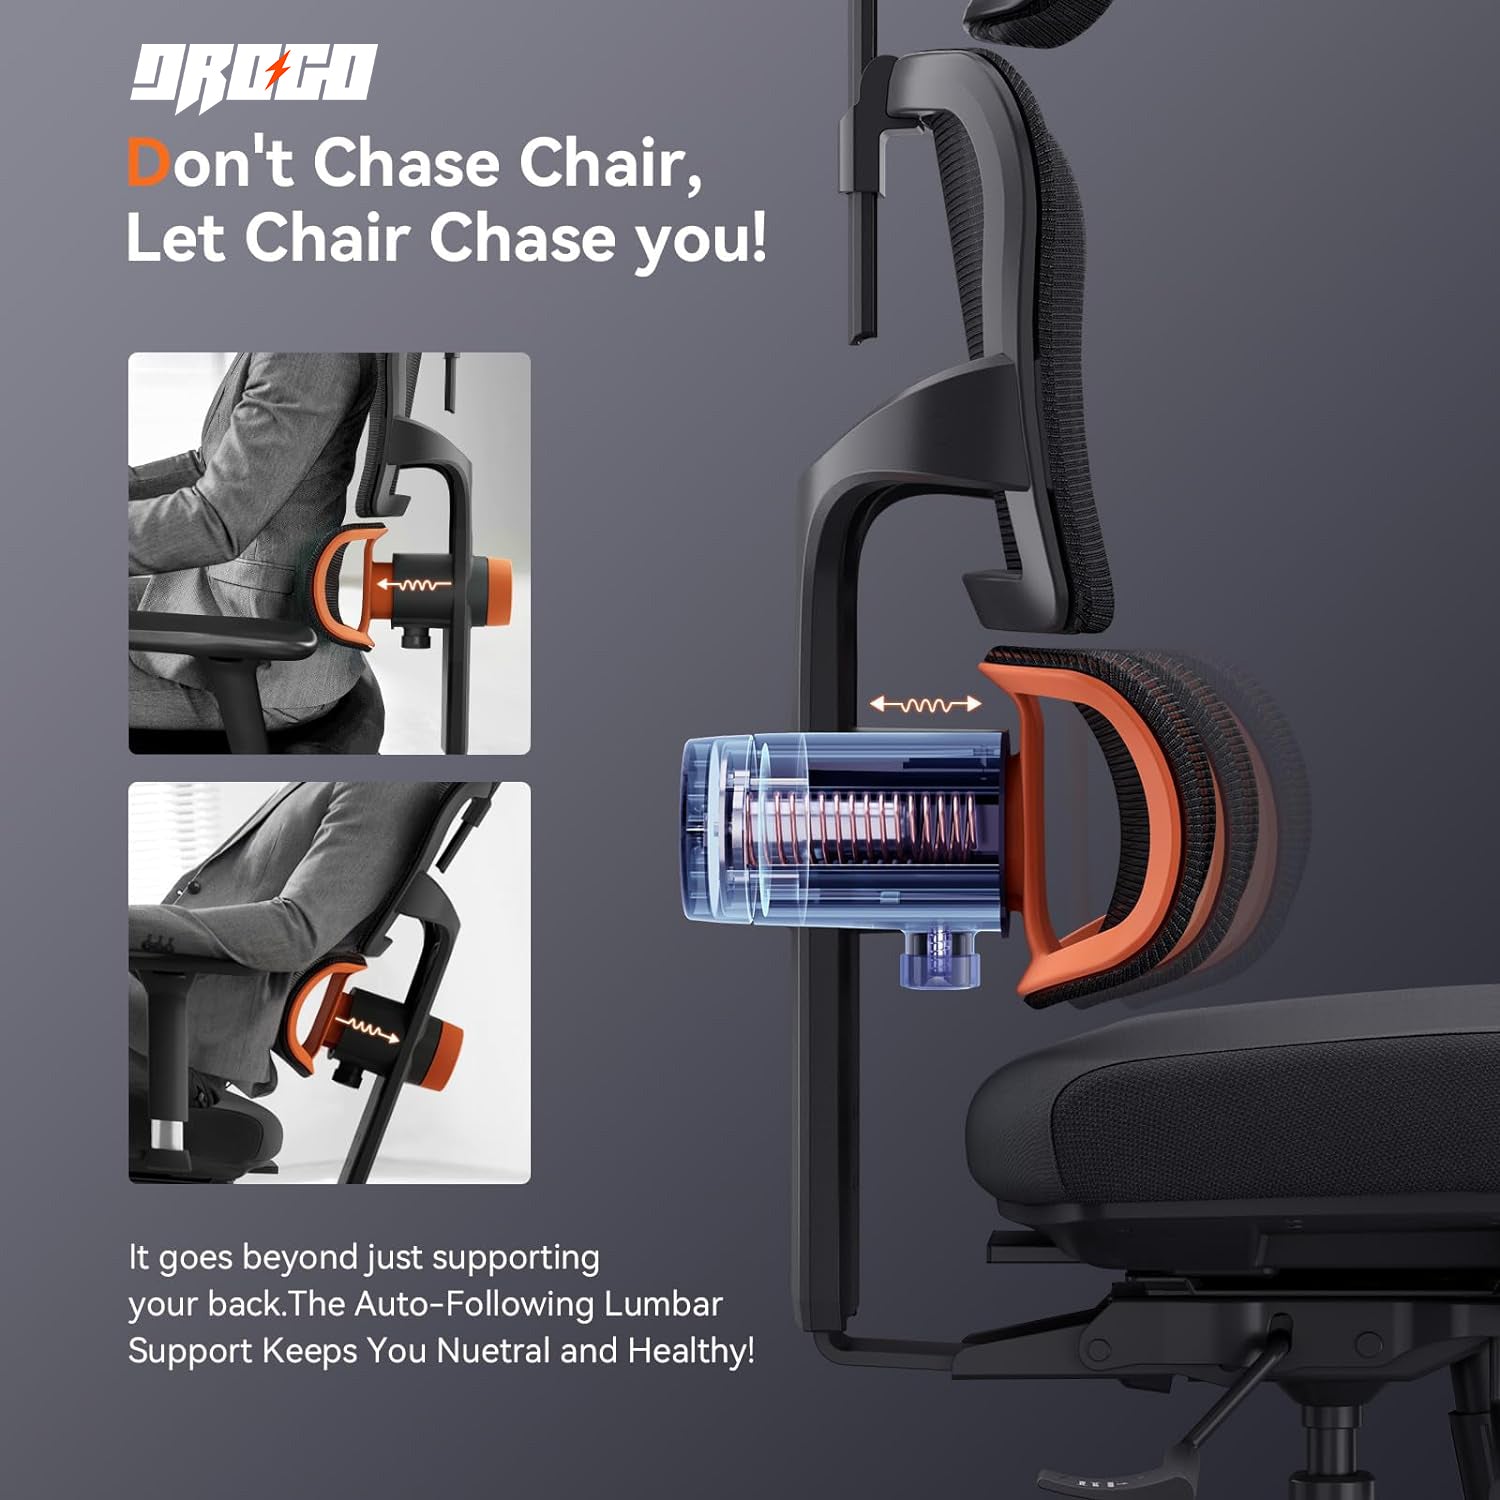 Drogo Ultra Premium Ergonomic Ofiice chair & Laptop Table - Home Office Desk Chair with Footrest Unique Adaptive Lumbar Support